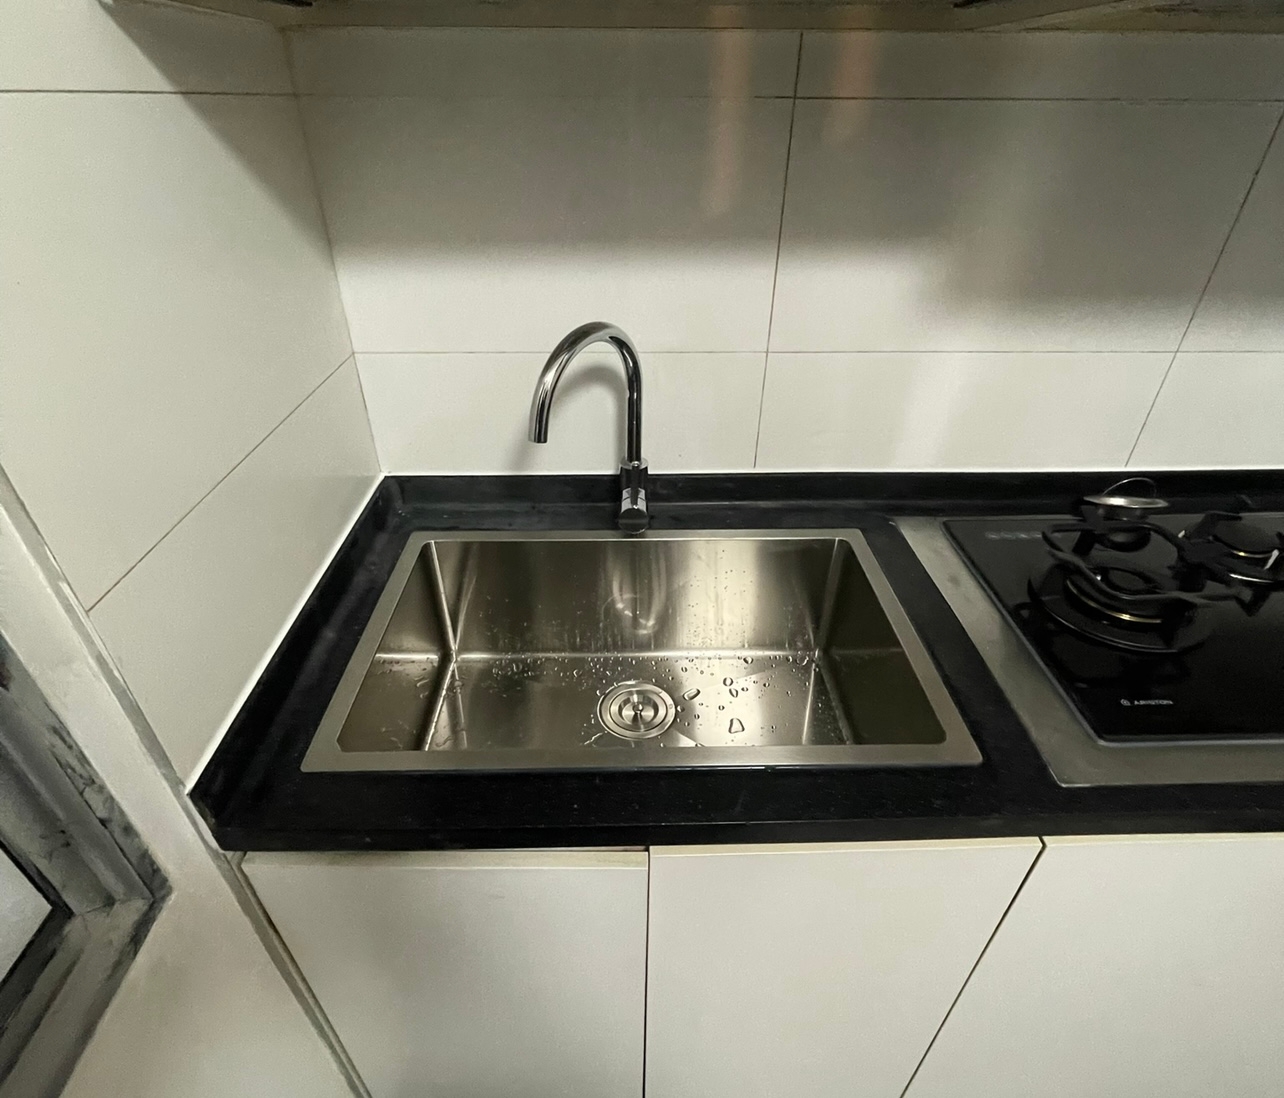 Sink And Tap Repair And Replacement Service